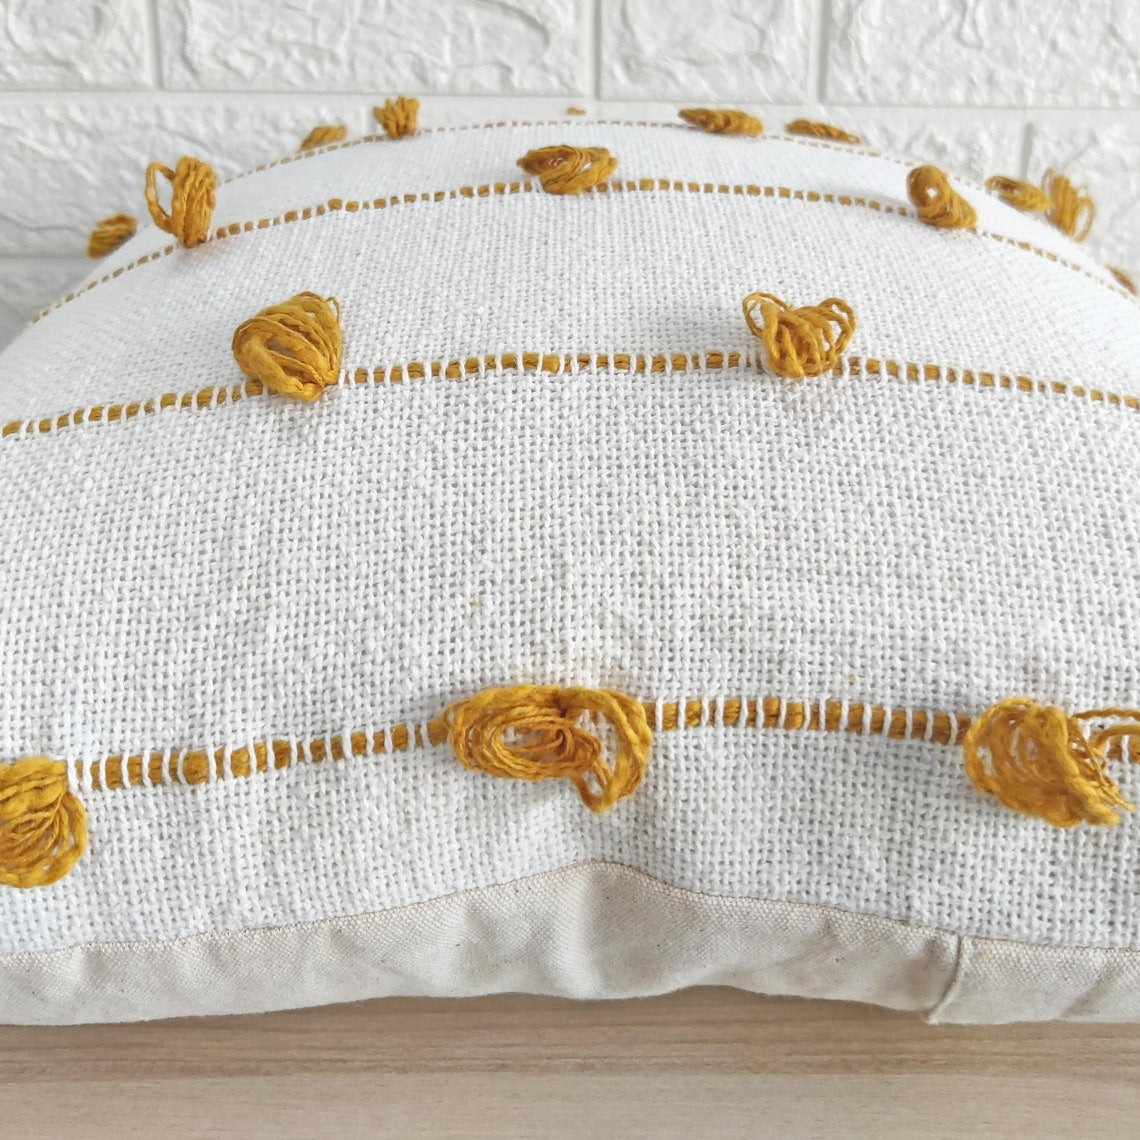 Mustard Yellow & Ivory Natural Raw Cotton Hand Loom Woven Textured Fabric Cushion Cover